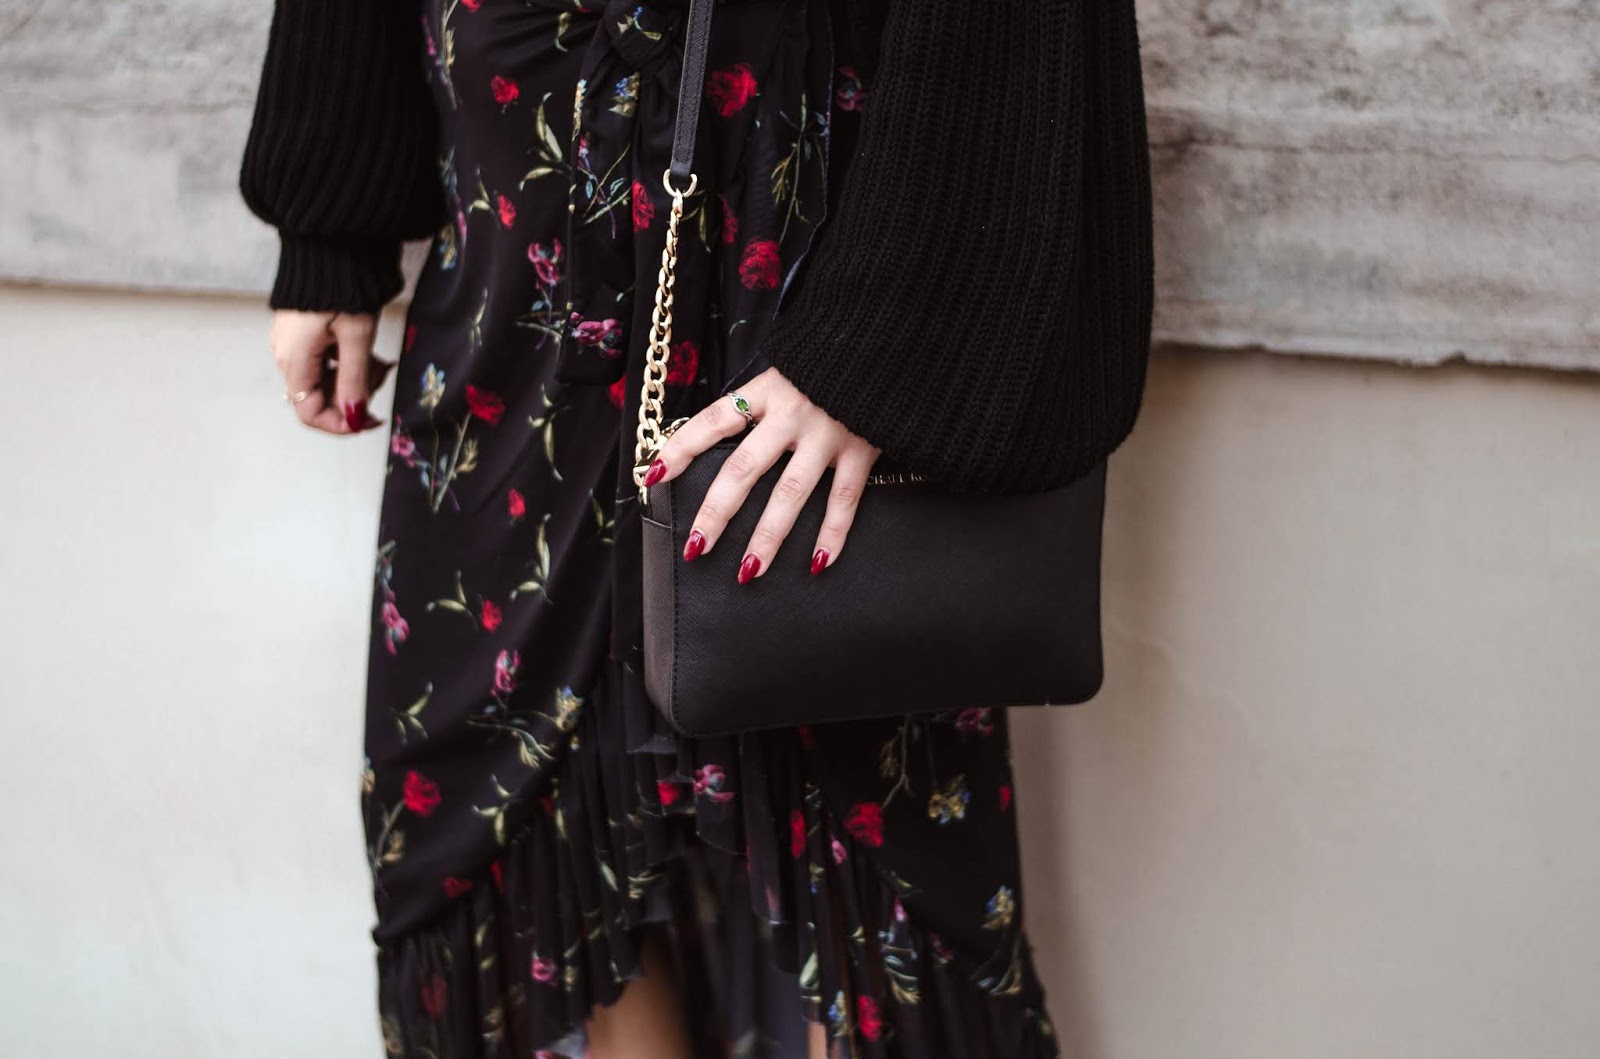 na-kd, wrap skirt, floral skirt, wide sleeves sweater, high heels, blog, blogger, outfit, michael kors